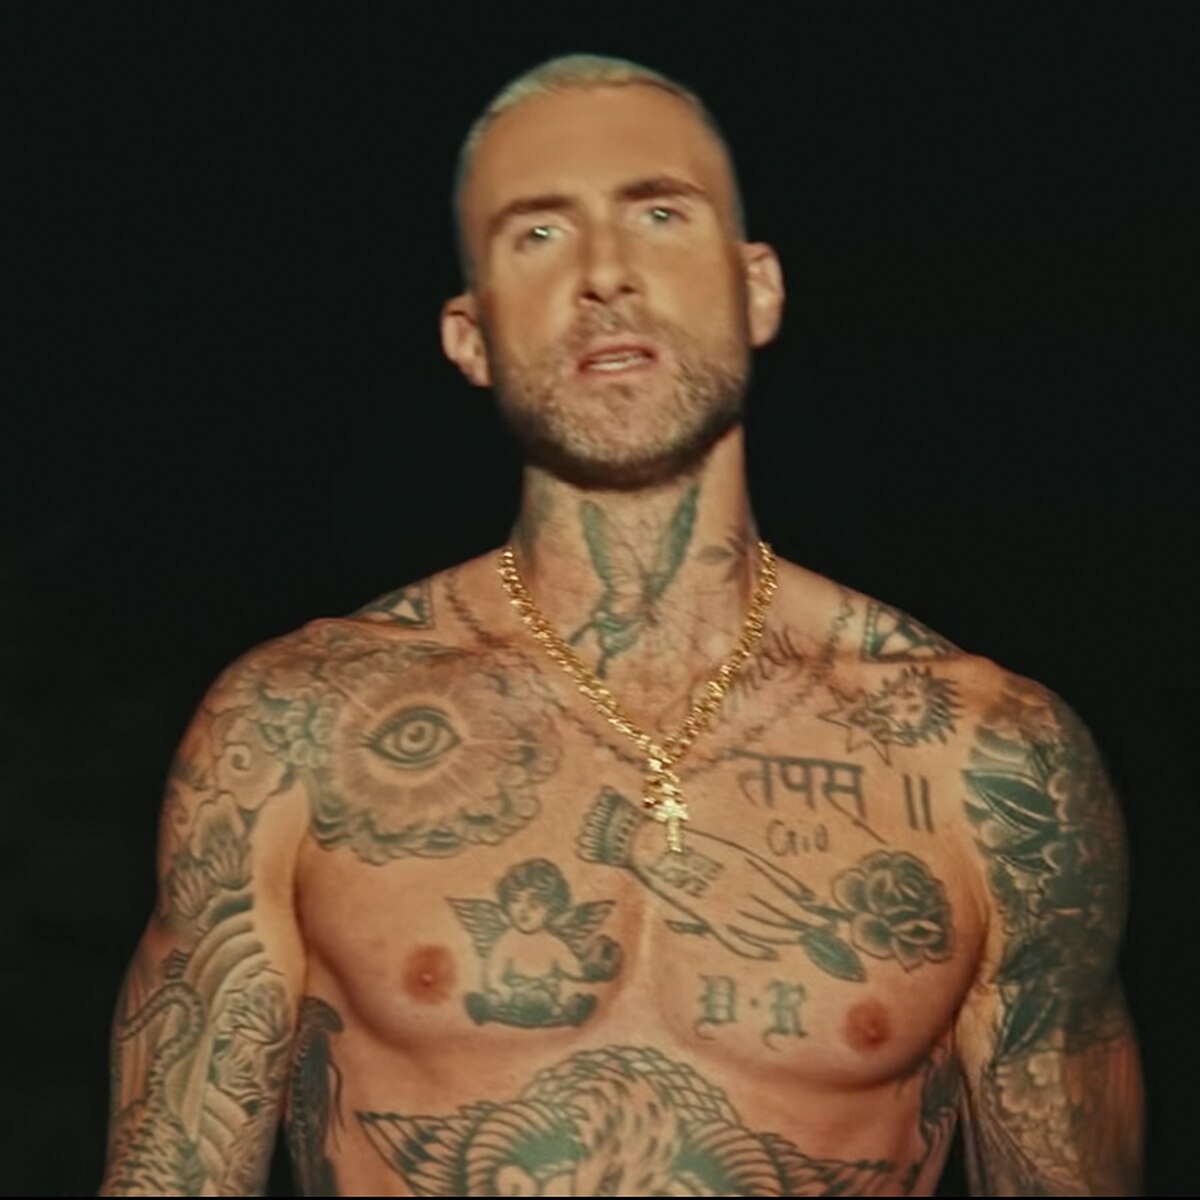 Shirtless Adam Levine Returns With New Music Video After Scandal